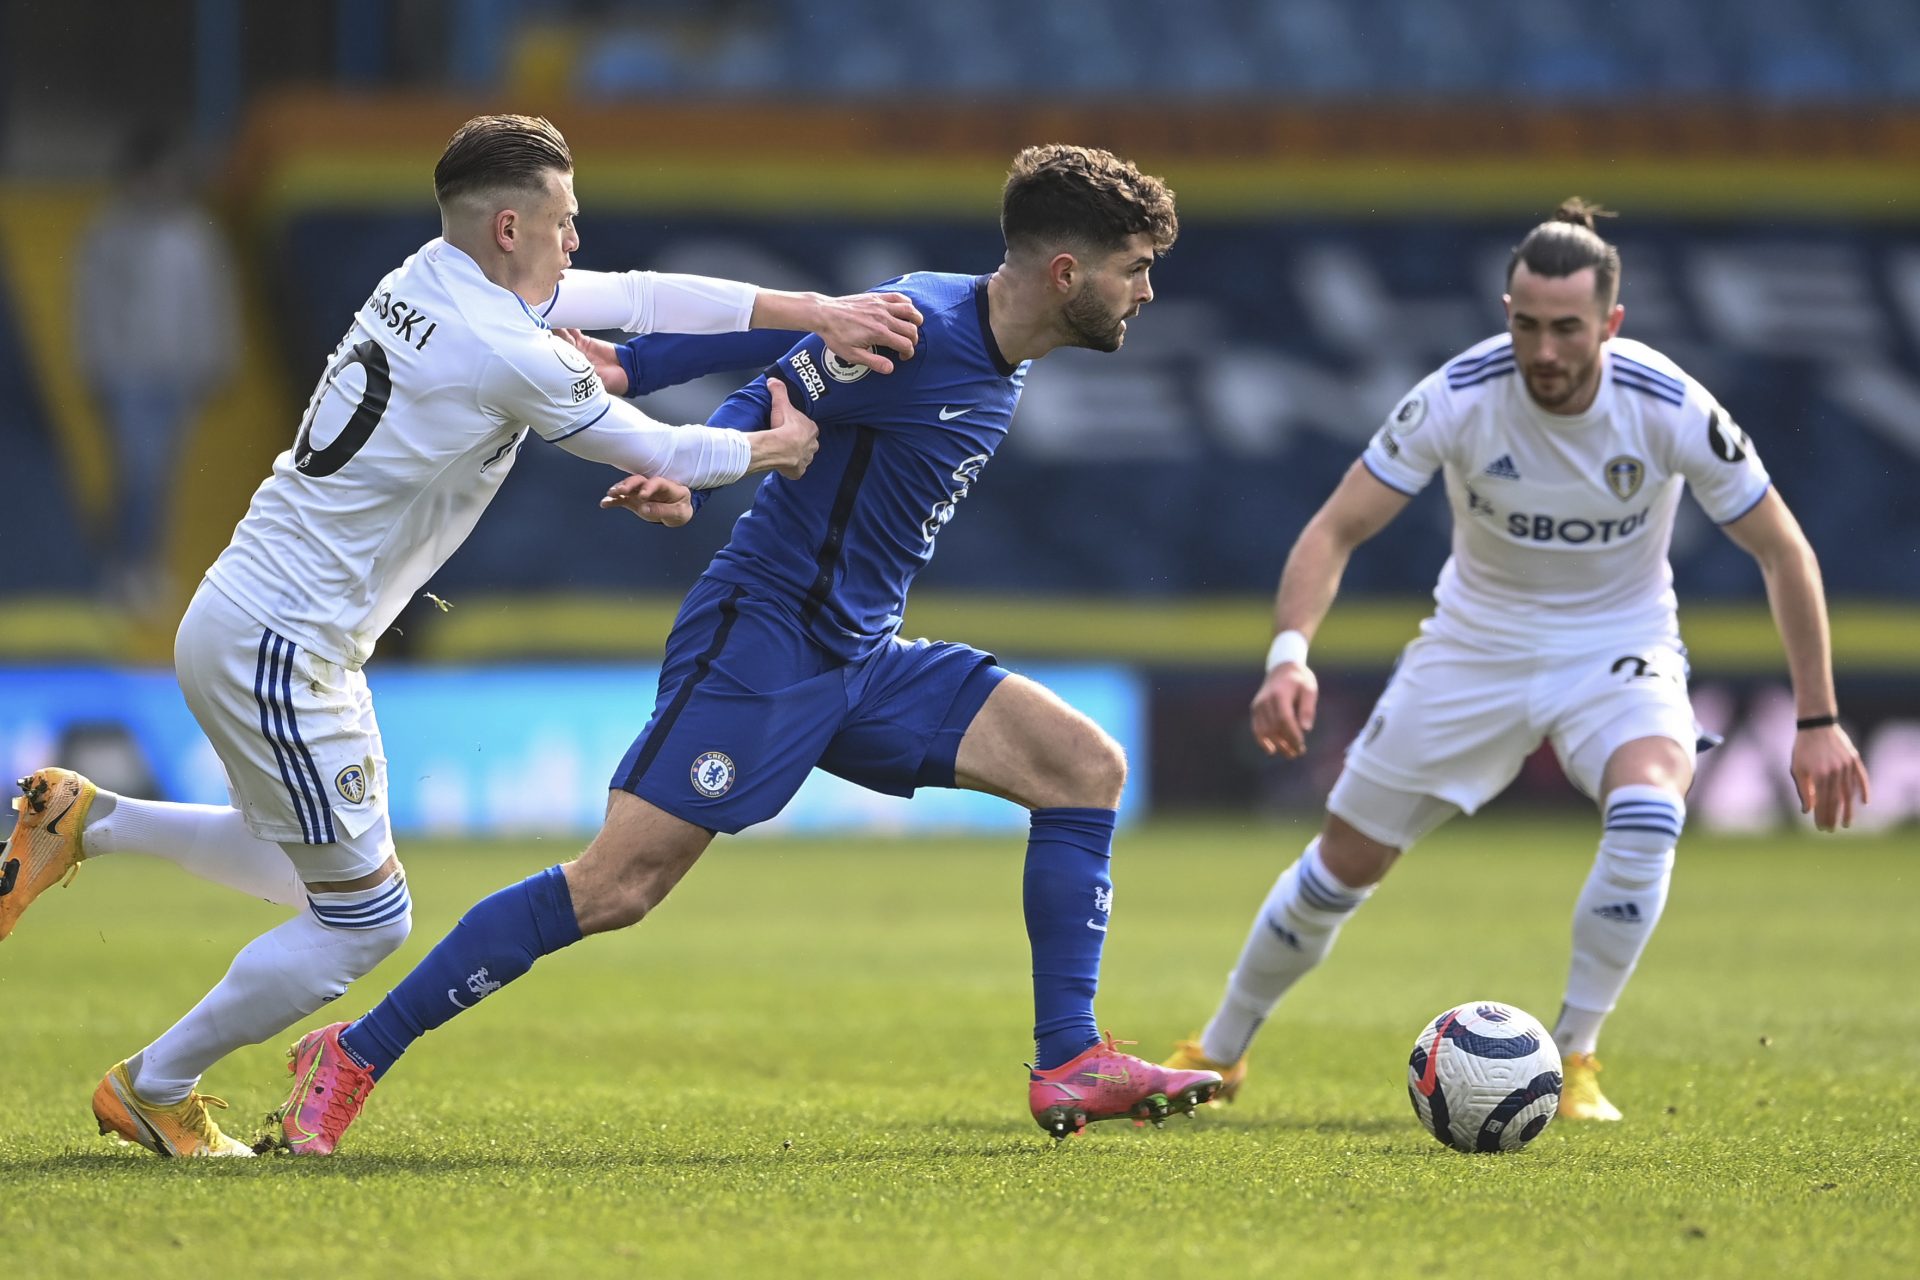 Chelsea's Christian Pulisic, right, challenges for the ball with Leeds United's Ezgjan Alioski during the English Premier League soccer match between Leeds United and Chelsea at Elland Road stadium, in Leeds, England, Saturday, March 13, 2021.